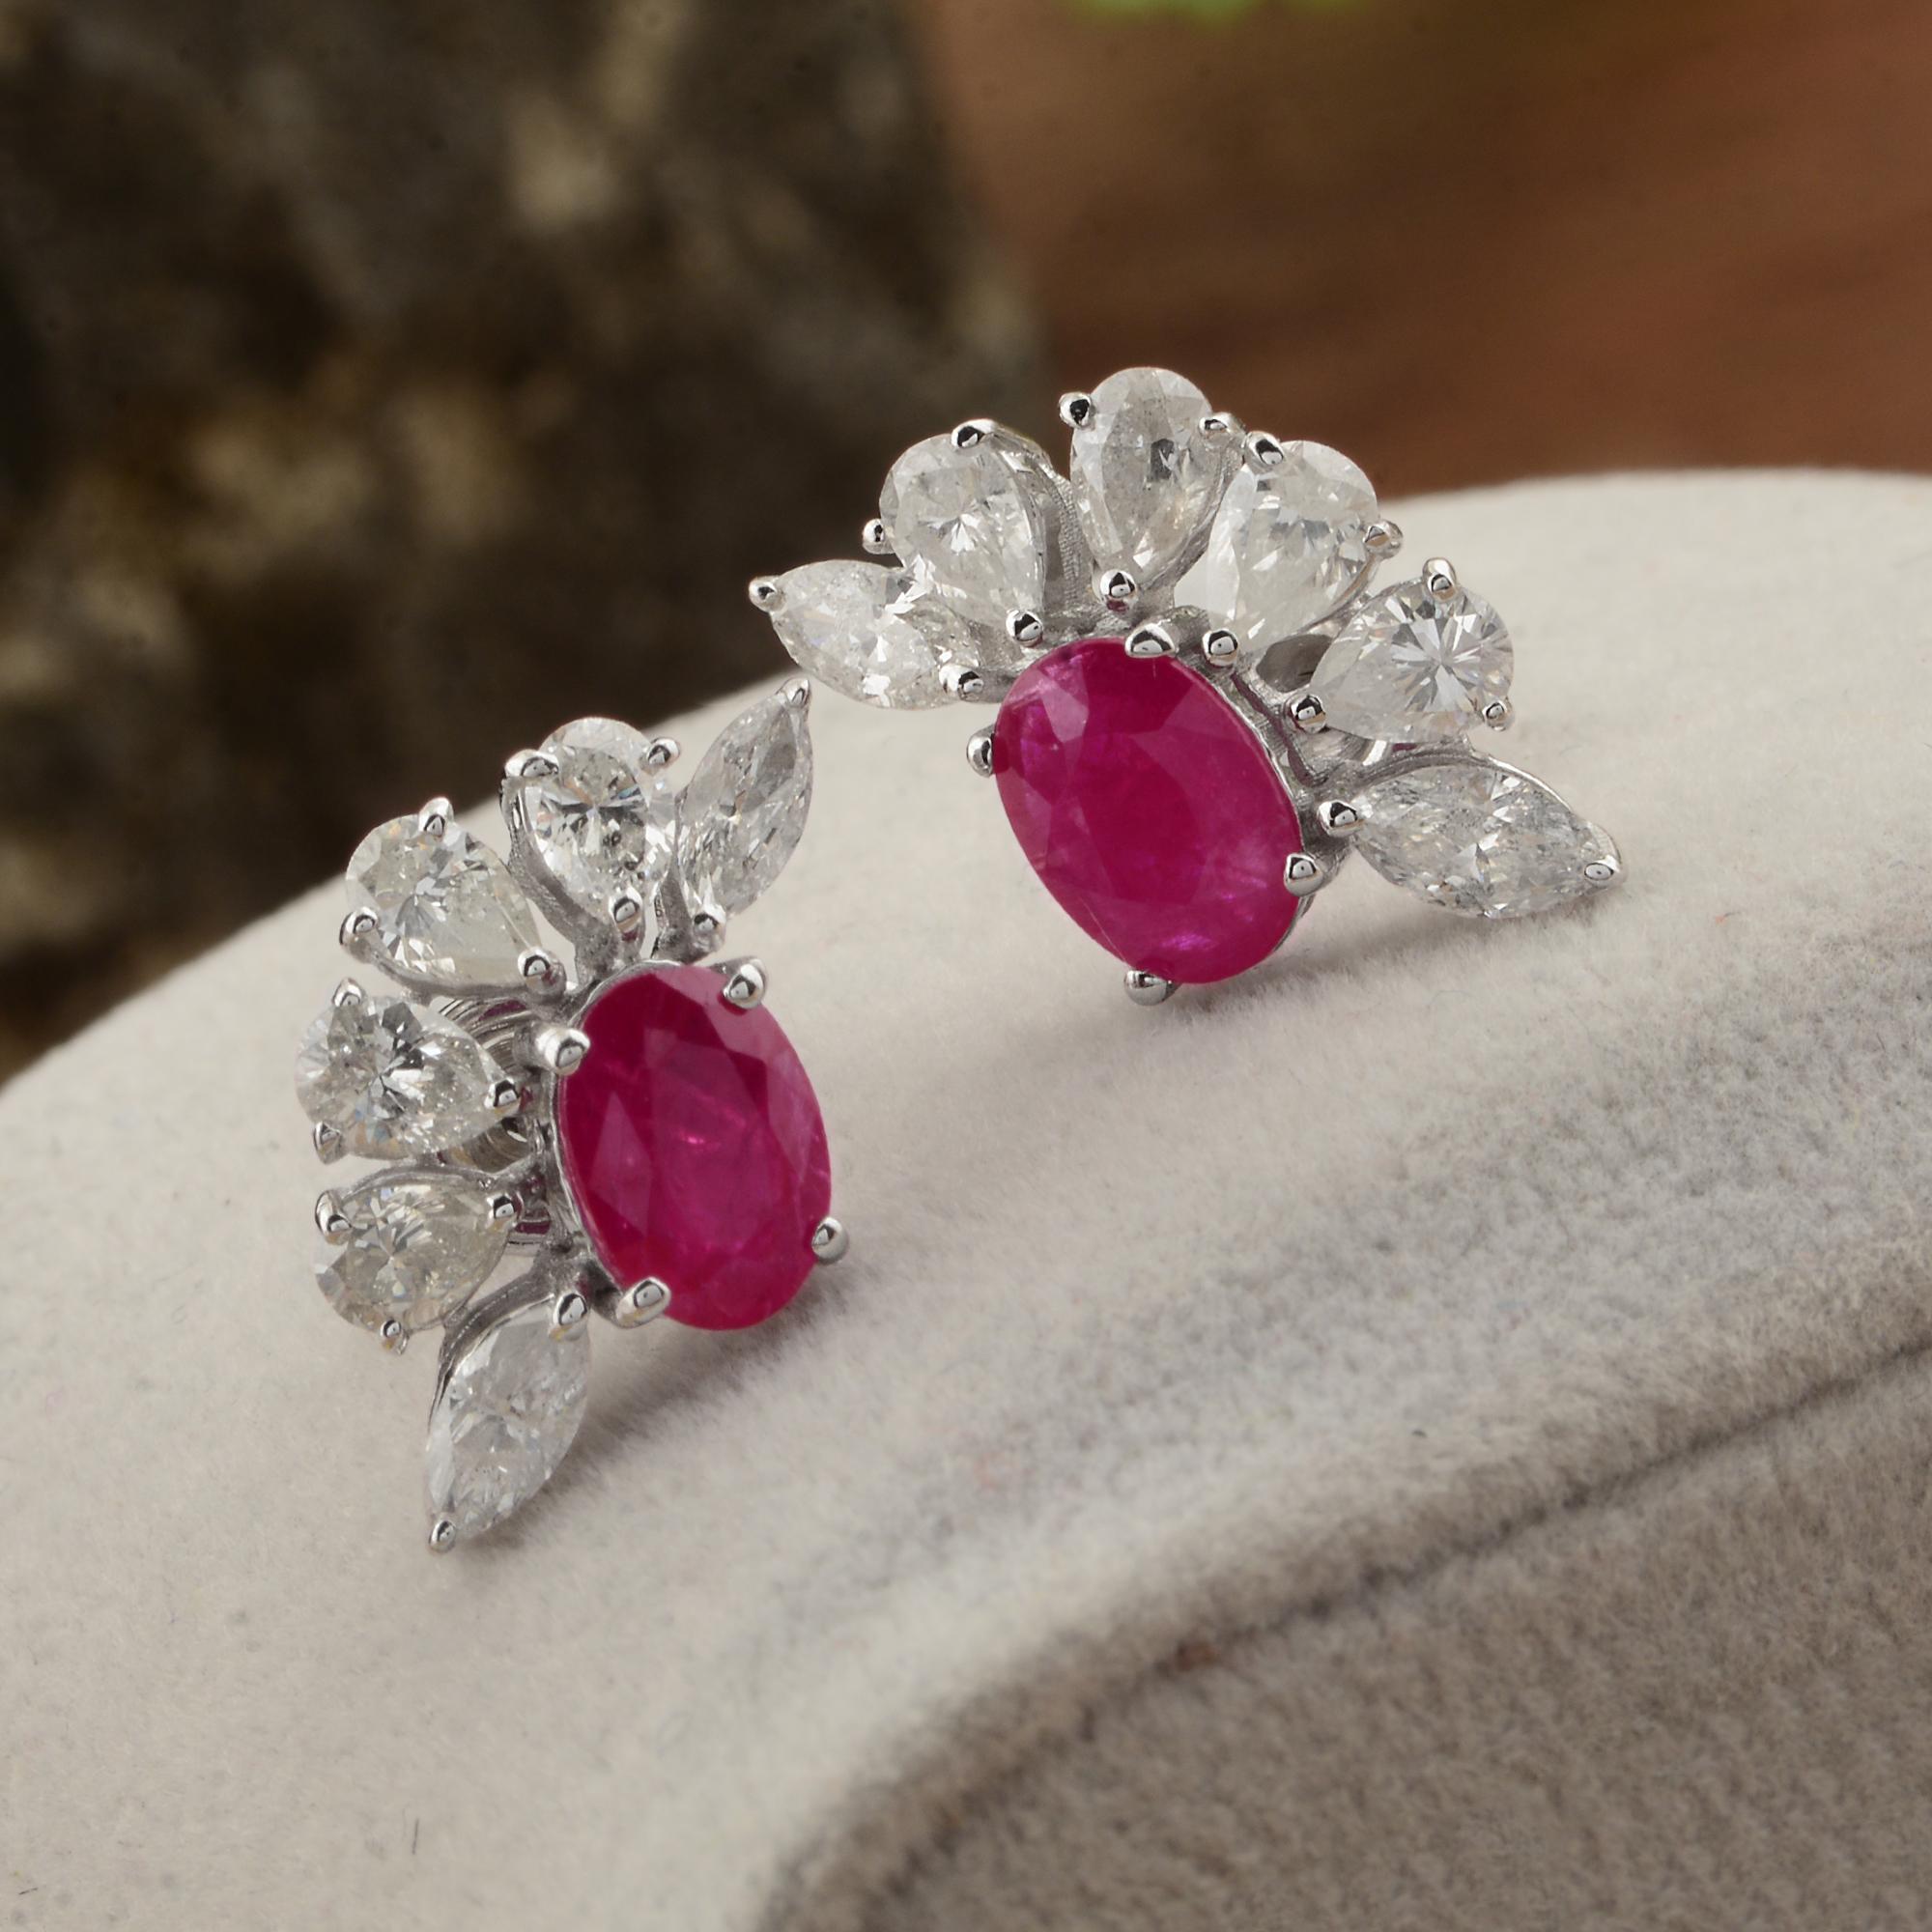 Modern Oval Ruby Gemstone Stud Earrings Solid 10k White Gold Marquise Diamond Jewelry For Sale